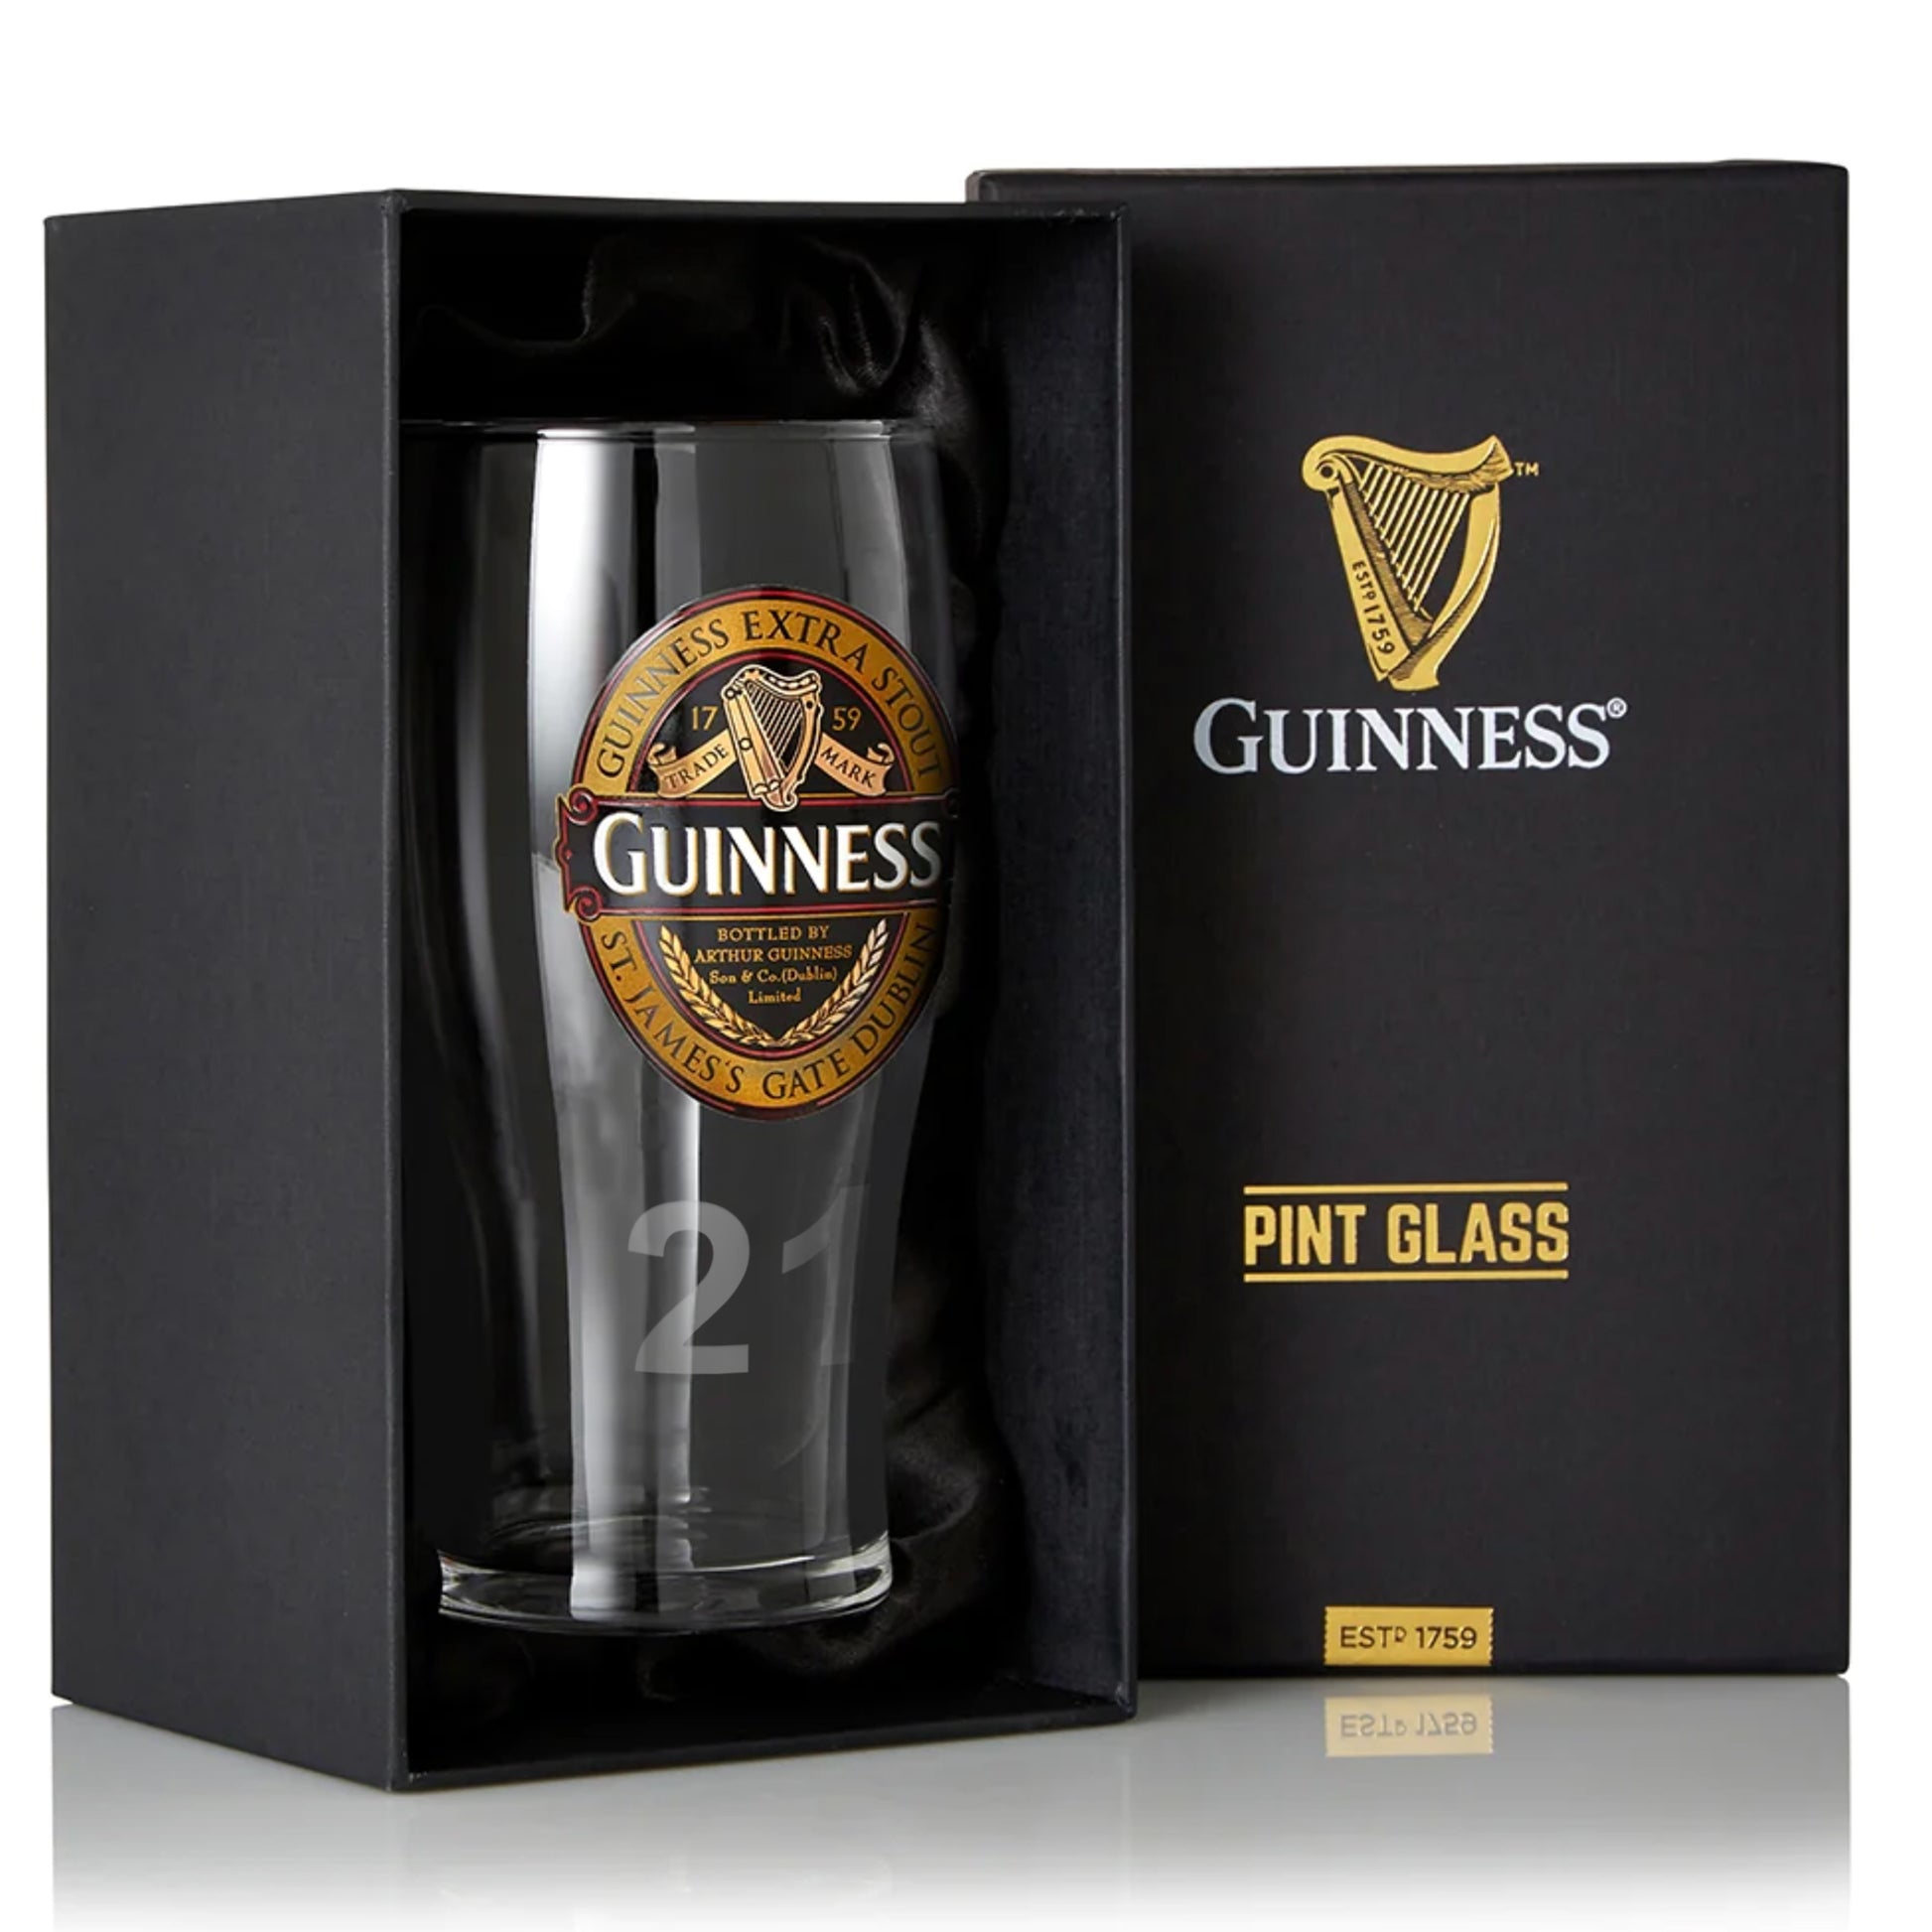 Guinness Classic Collection Pint Glass featuring the Extra Stout Label, delicately packaged in a box from Guinness UK.